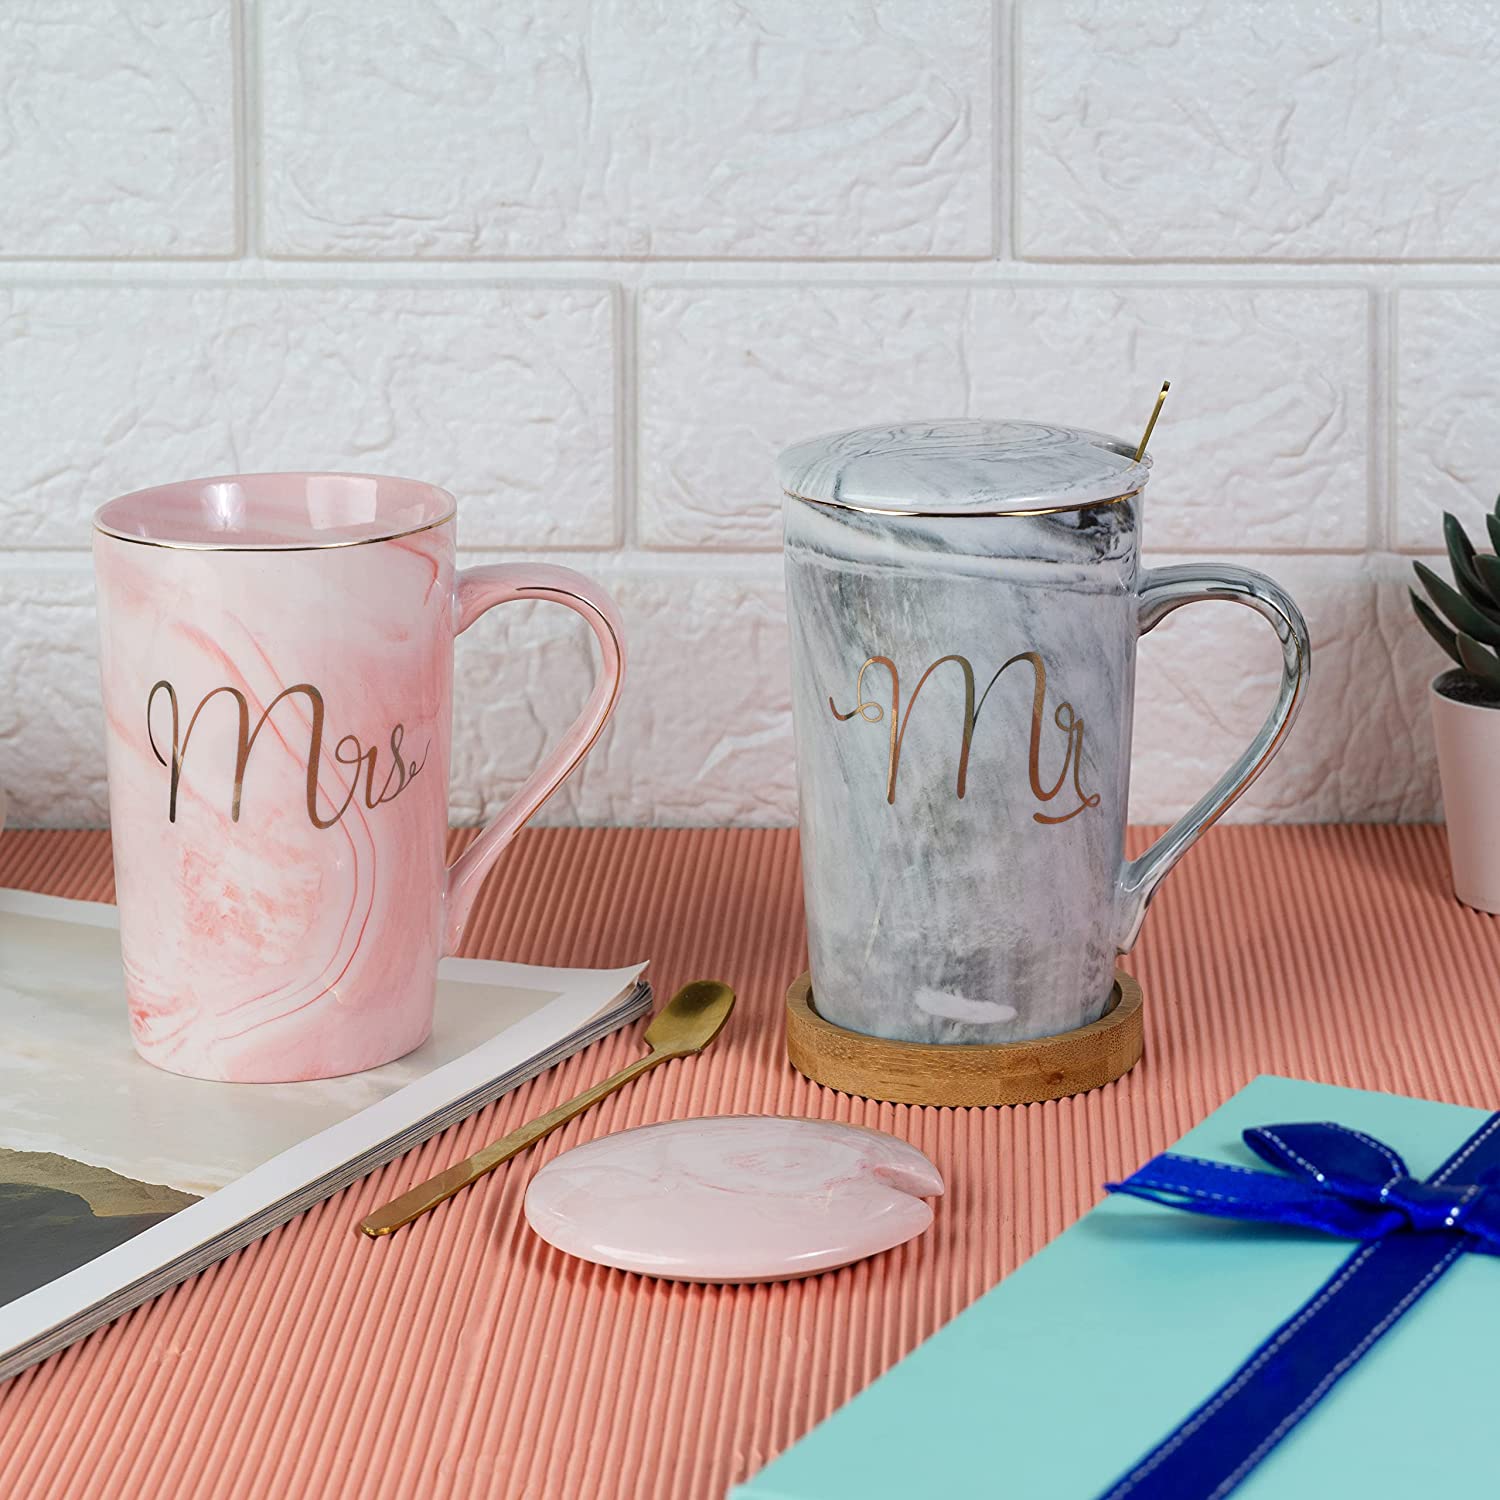 SKYTONE Ceramic Marble Finish Coffee MR & MRS Mug with Lid & Spoon for Anniversary Wedding Engagement Valentine Gifts